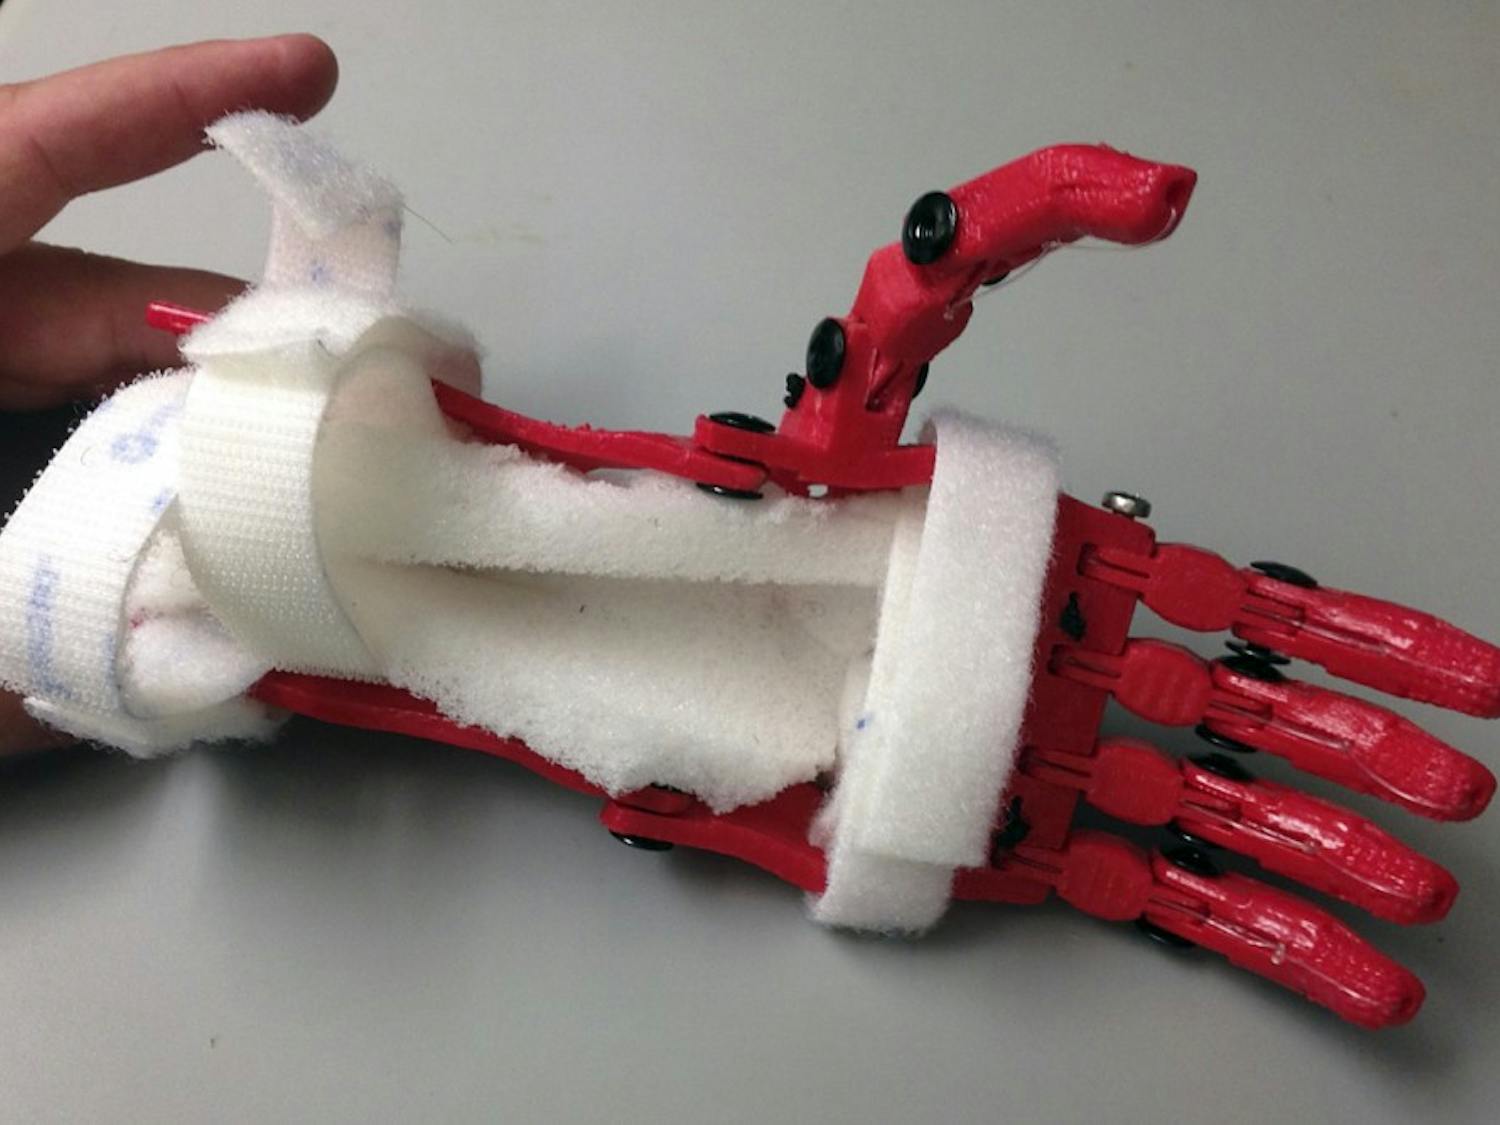 Jeff Powell, a senior biomedical engineering major and design chair of the UNC Biomedical Engineering Club, used a 3-D printer to make an affordable prosthetic hand for 7-year-old boy Holden Mora.Courtesy of Jeff Powell